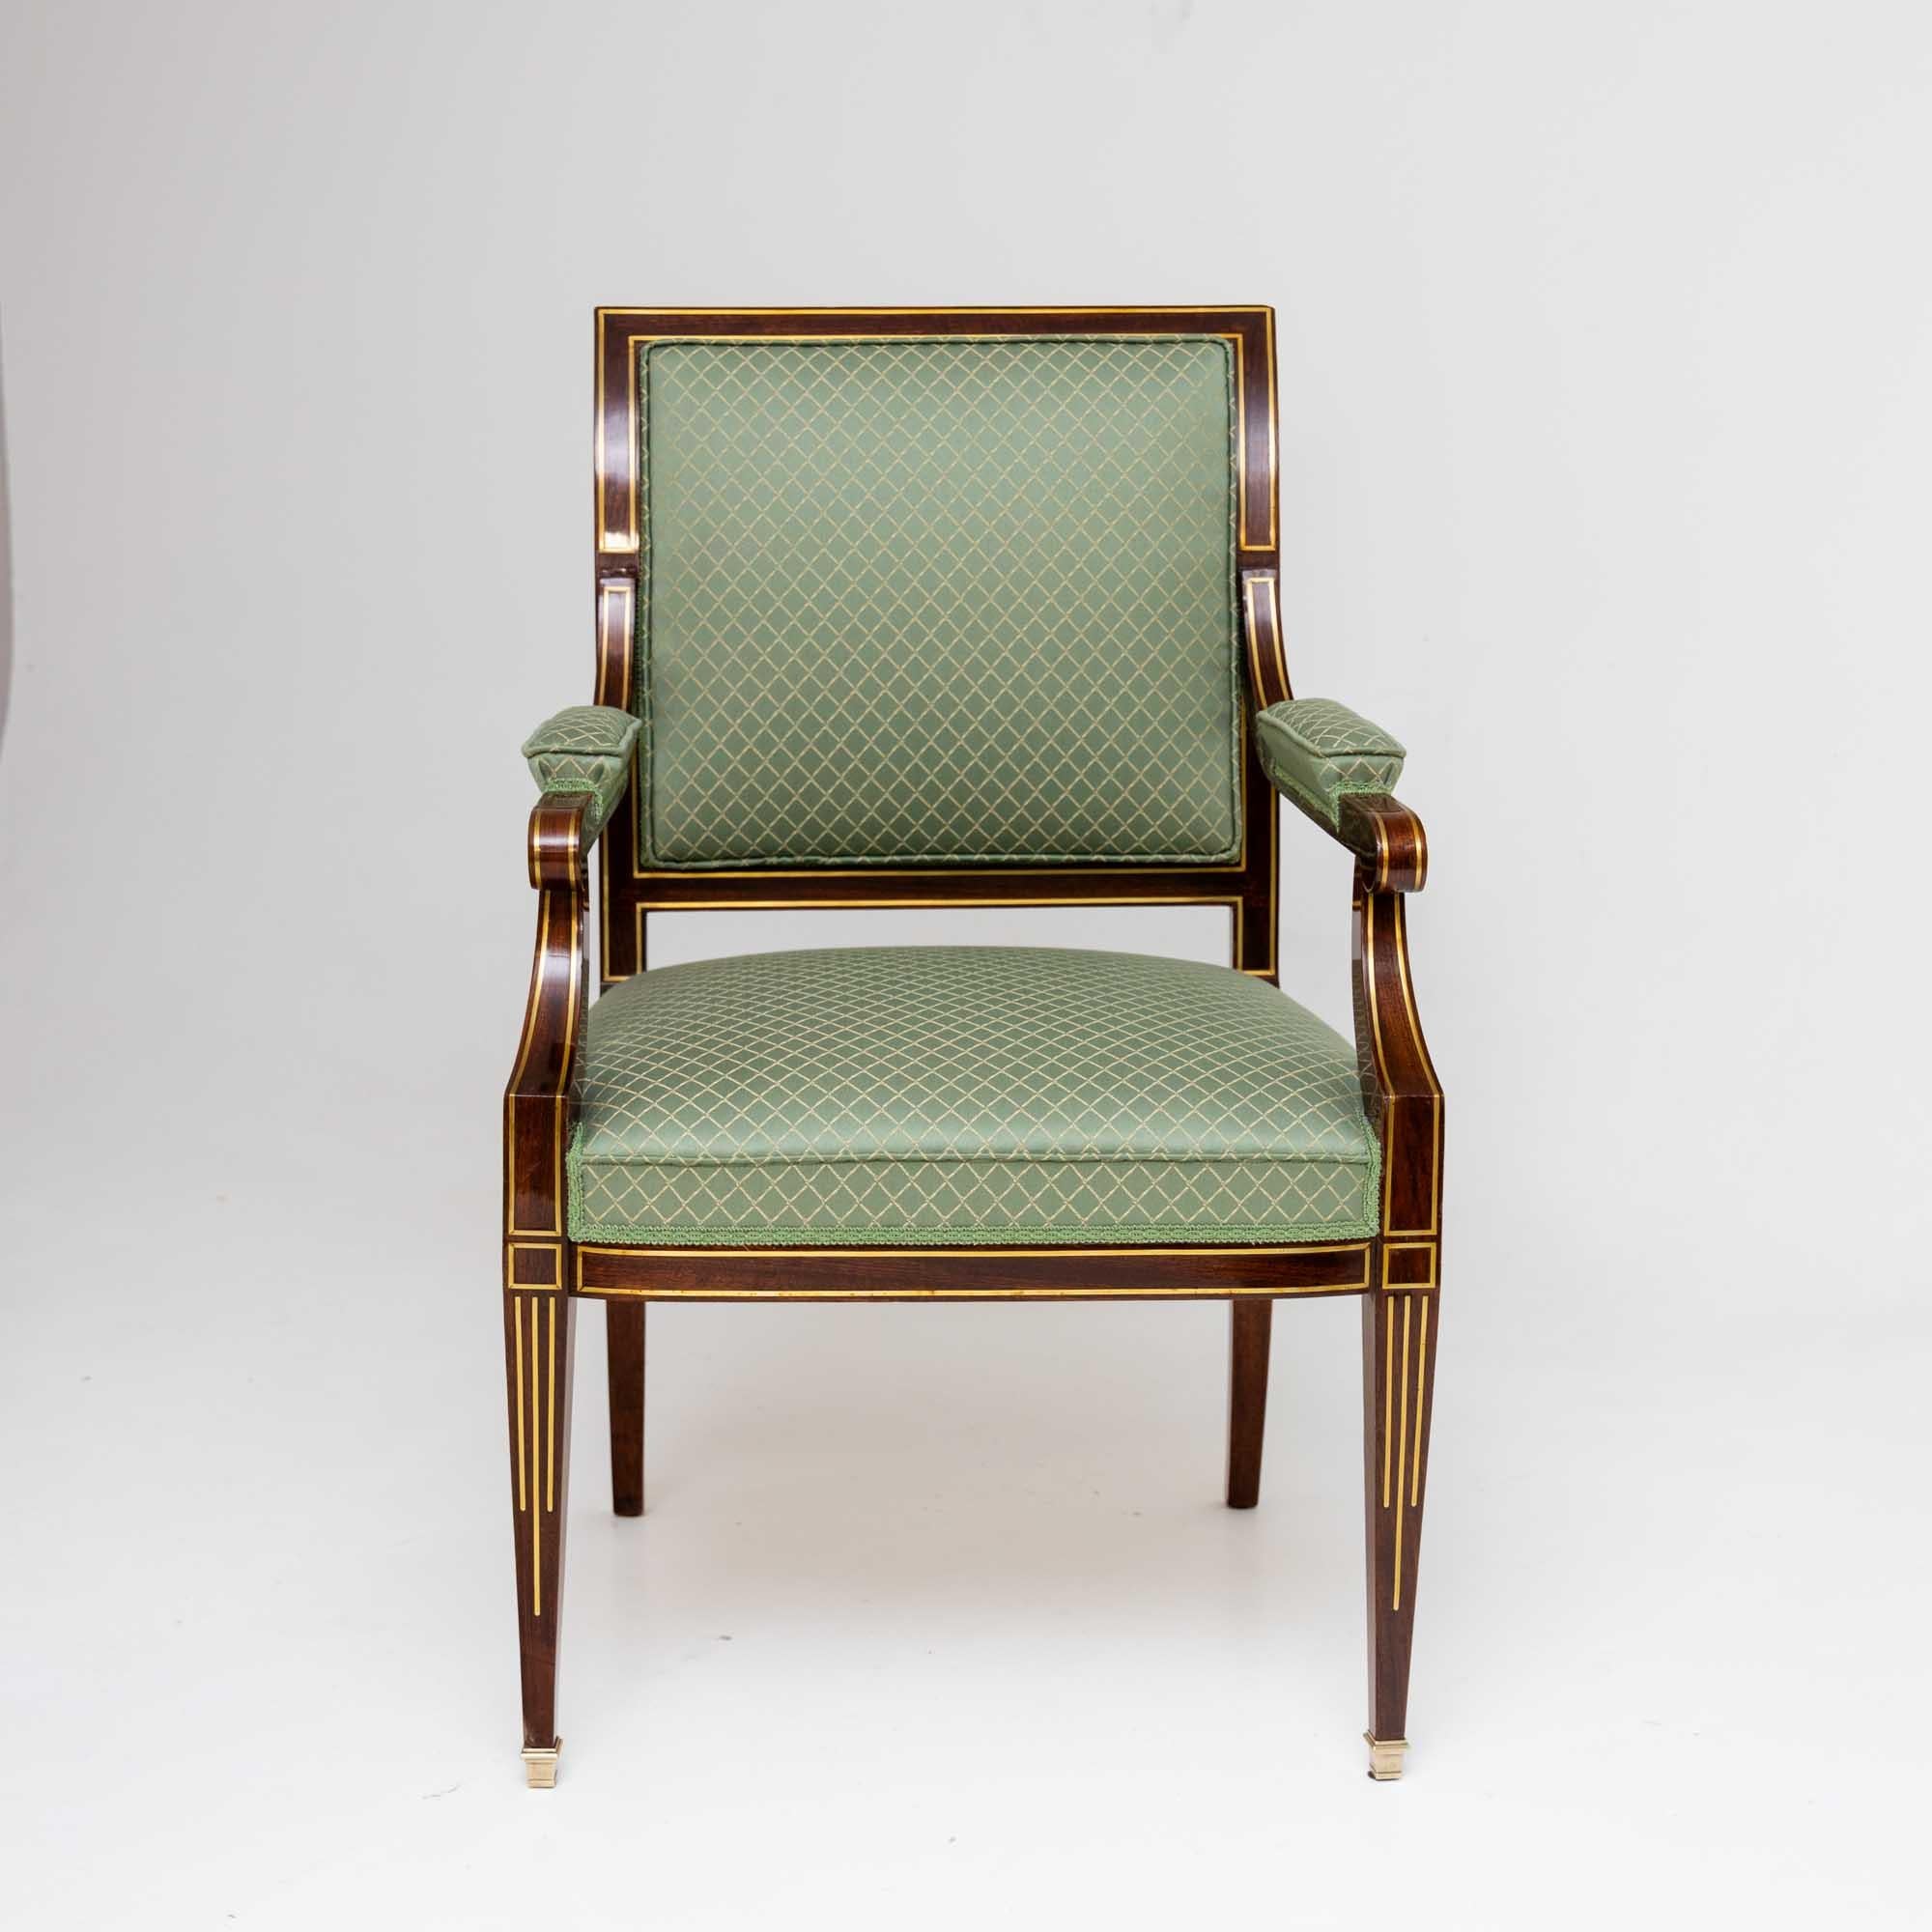 European Armchair with Brass Inlays, 19th Century For Sale